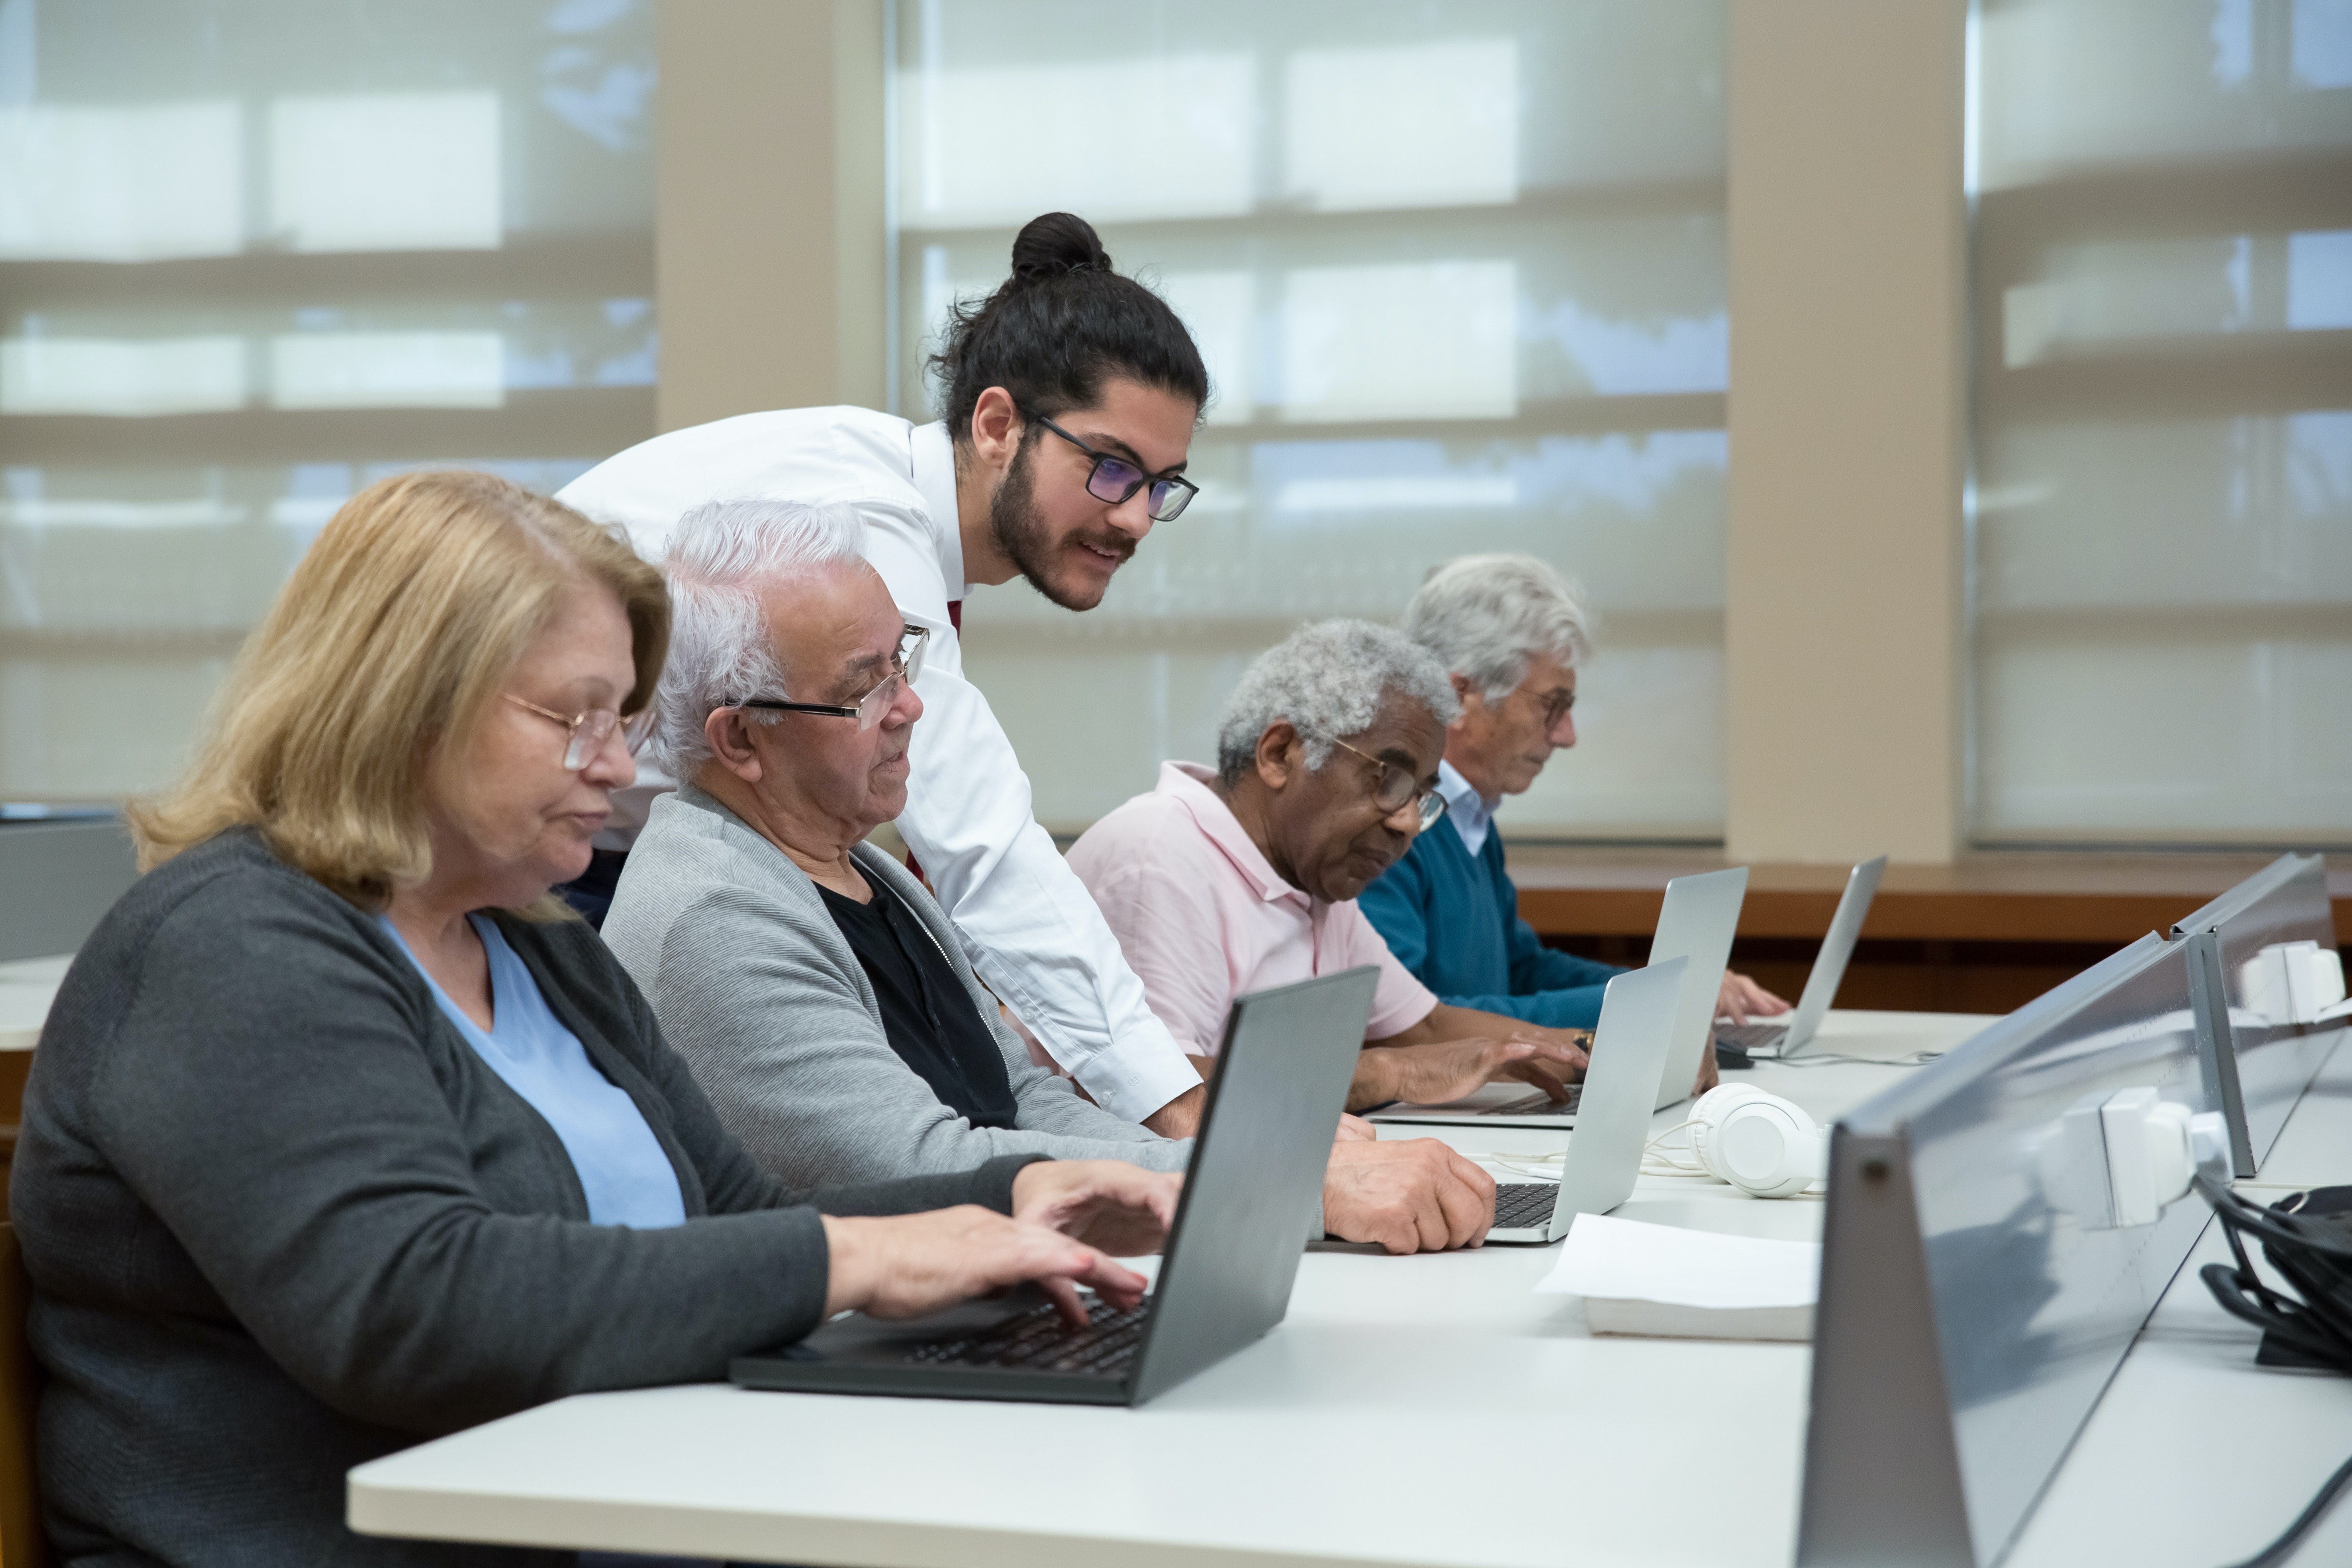 A man teaching a group of elderly people using laptops. The teacher is a younger man